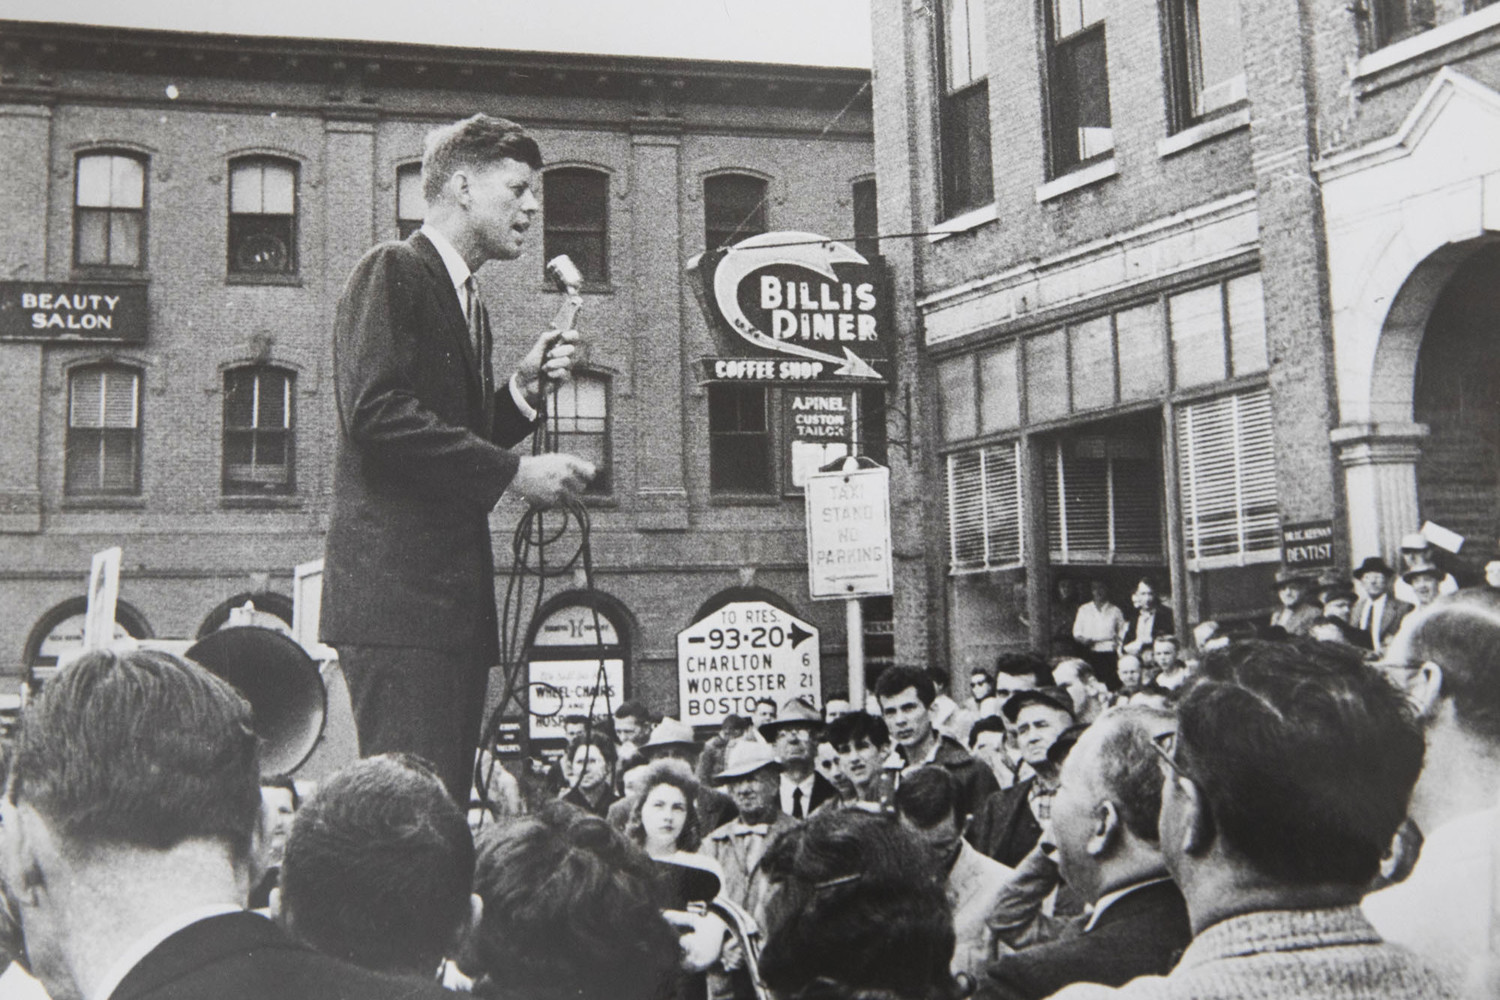 Black and White image of John F. Kennedy standing above the crowd in a street talking into a microphone